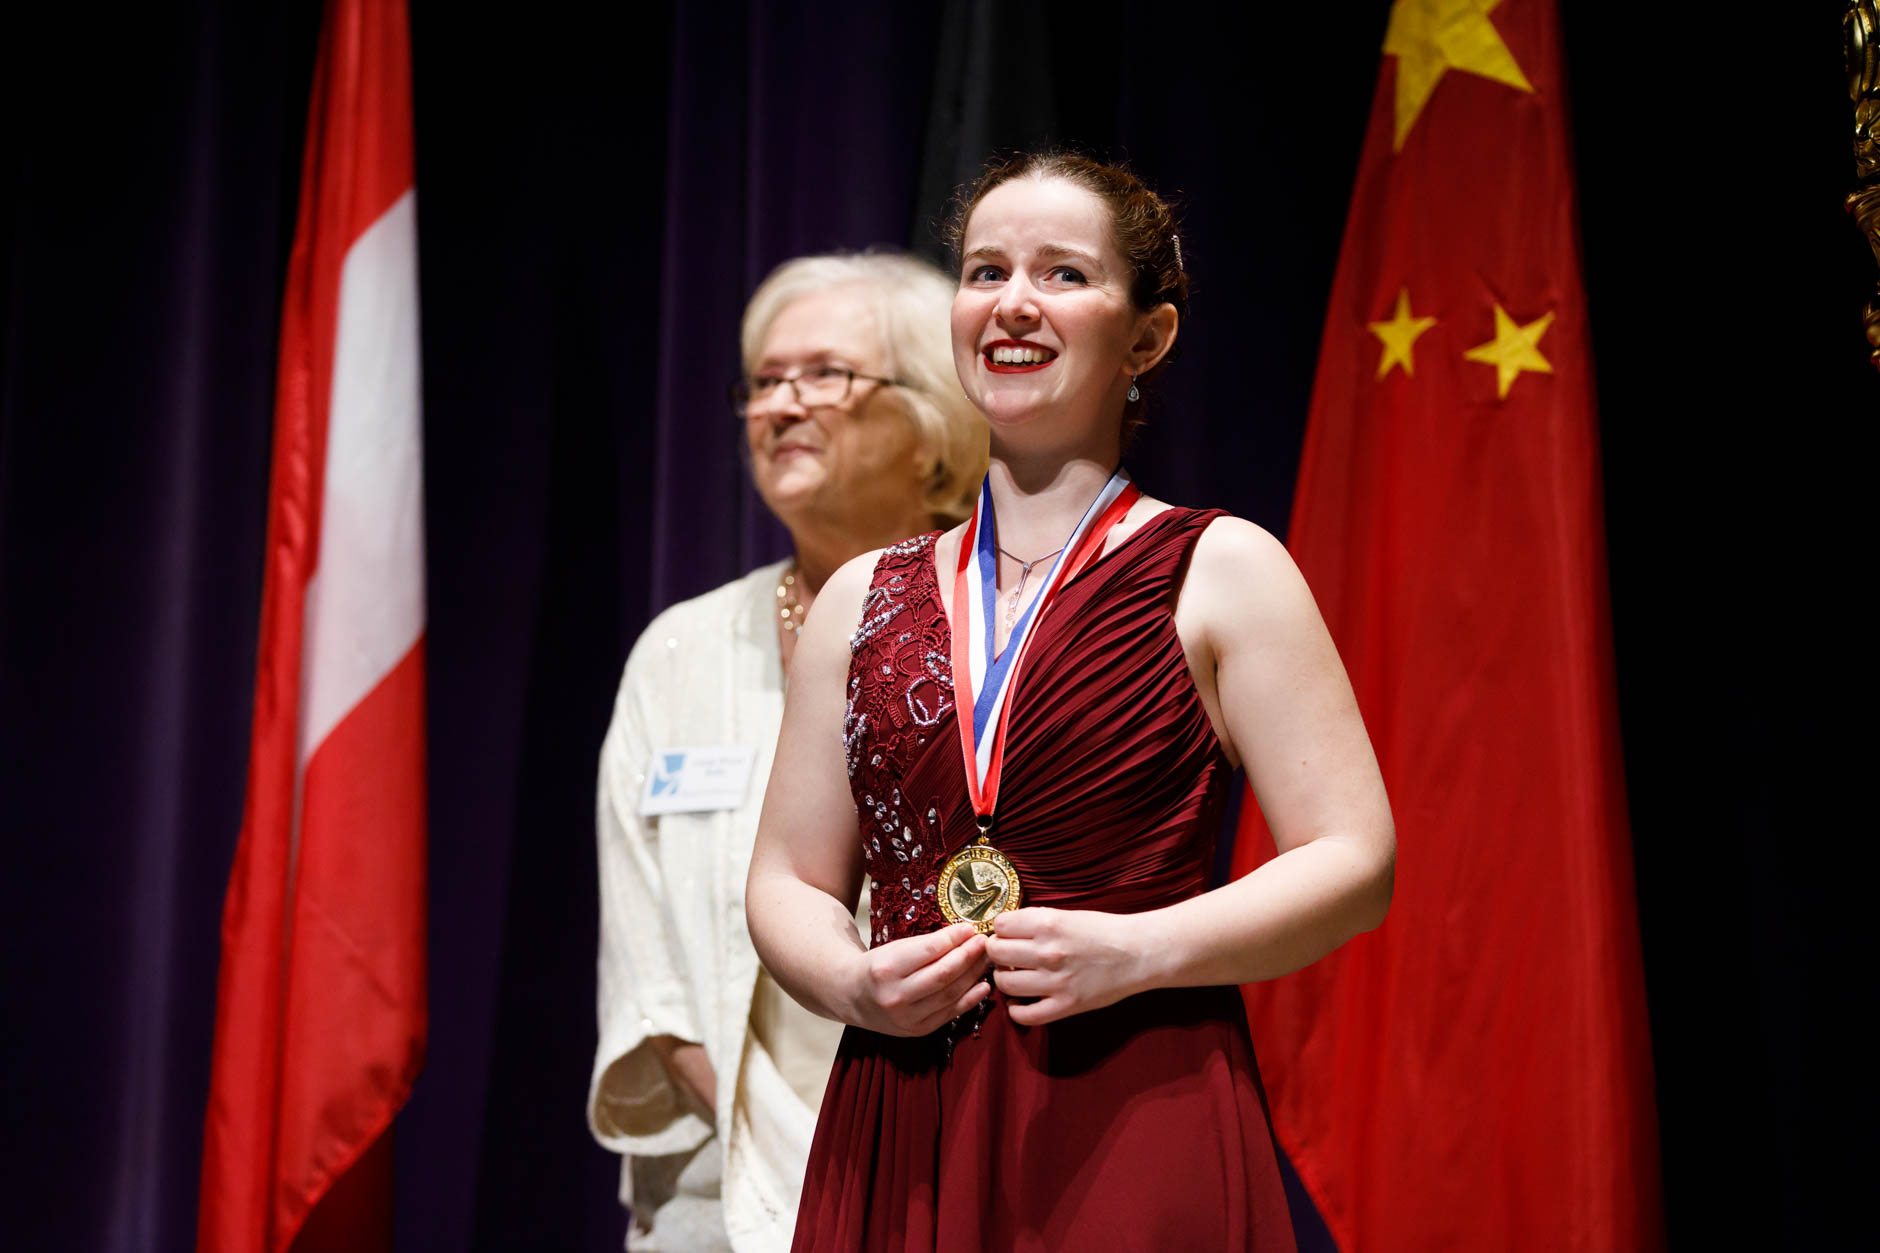 First prize winner Melanie Laurent from France receives her first-prize medal during the awards ceremony of the 11th USA International Harp Competition at Indiana University in Bloomington, Indiana on Saturday, July 13, 2019. (Photo by James Brosher)